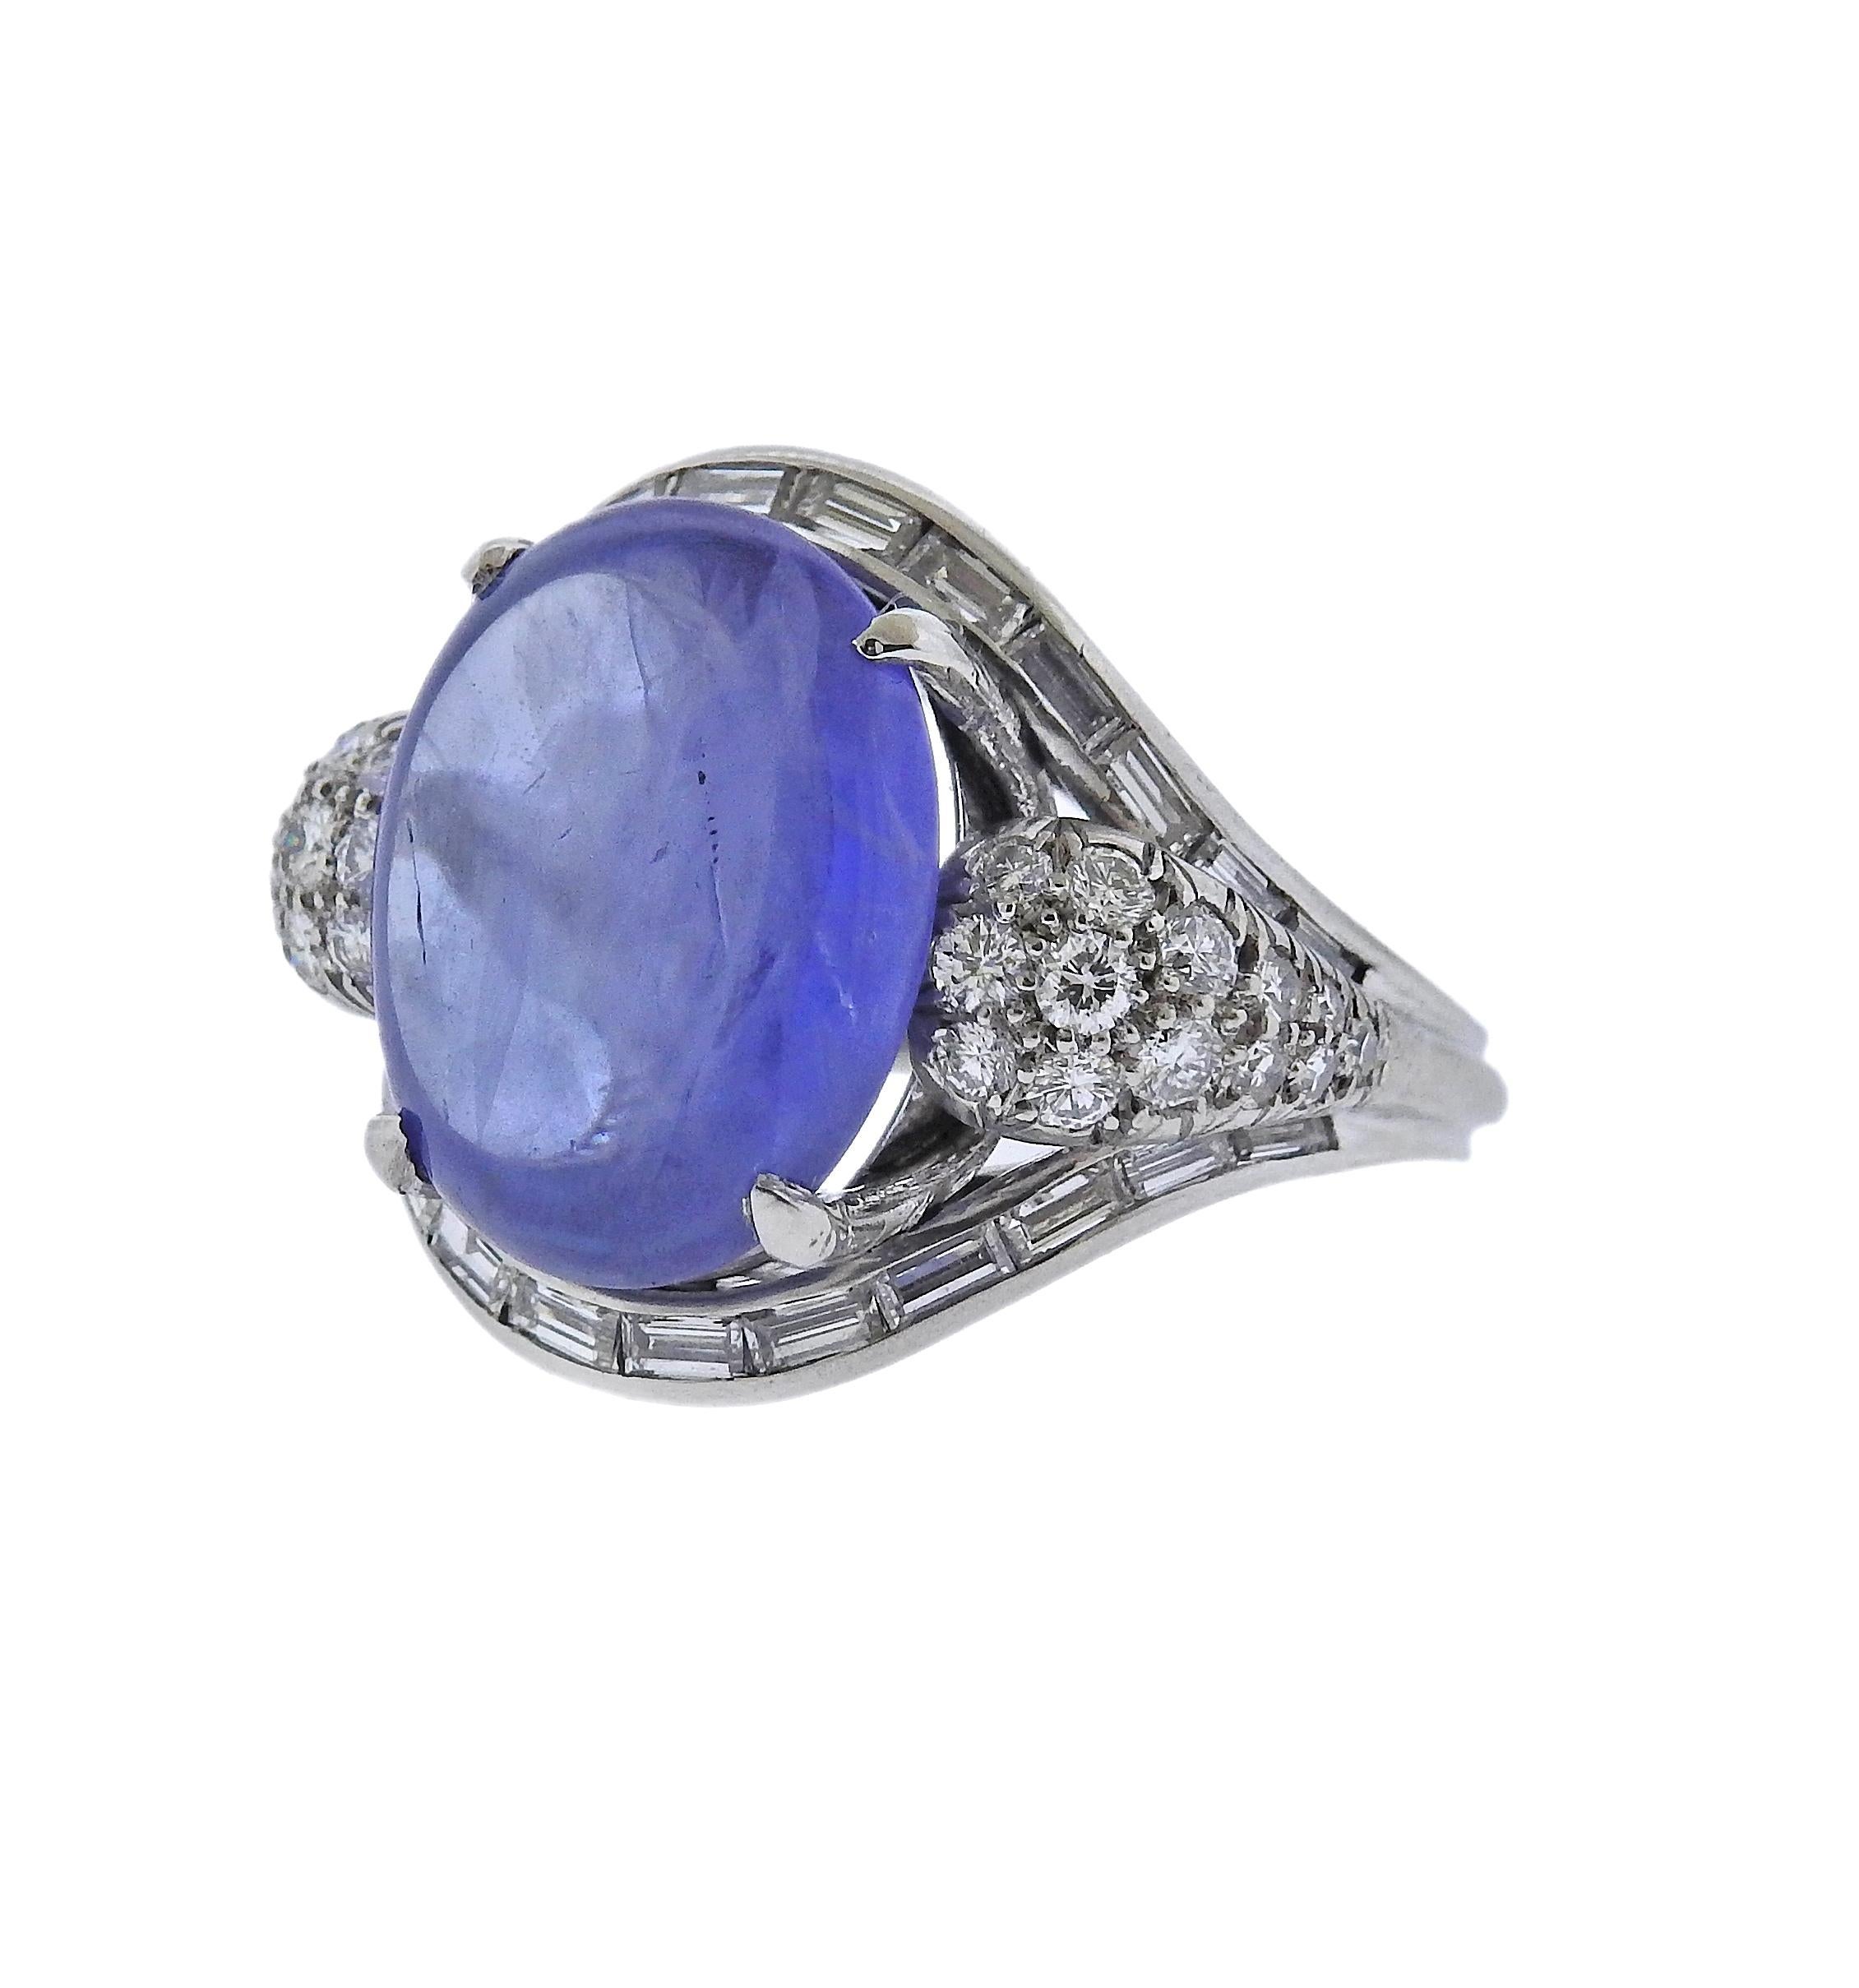 Platinum ring, with center approx. 11.36ct sapphire cabochon, surrounded with approx. 0.70ctw H/VS-Si diamonds. Ring size 6.25 (EU size 52). Top is 18mm wide. Has punchmarks on the shank. Weight  12.2 grams. 